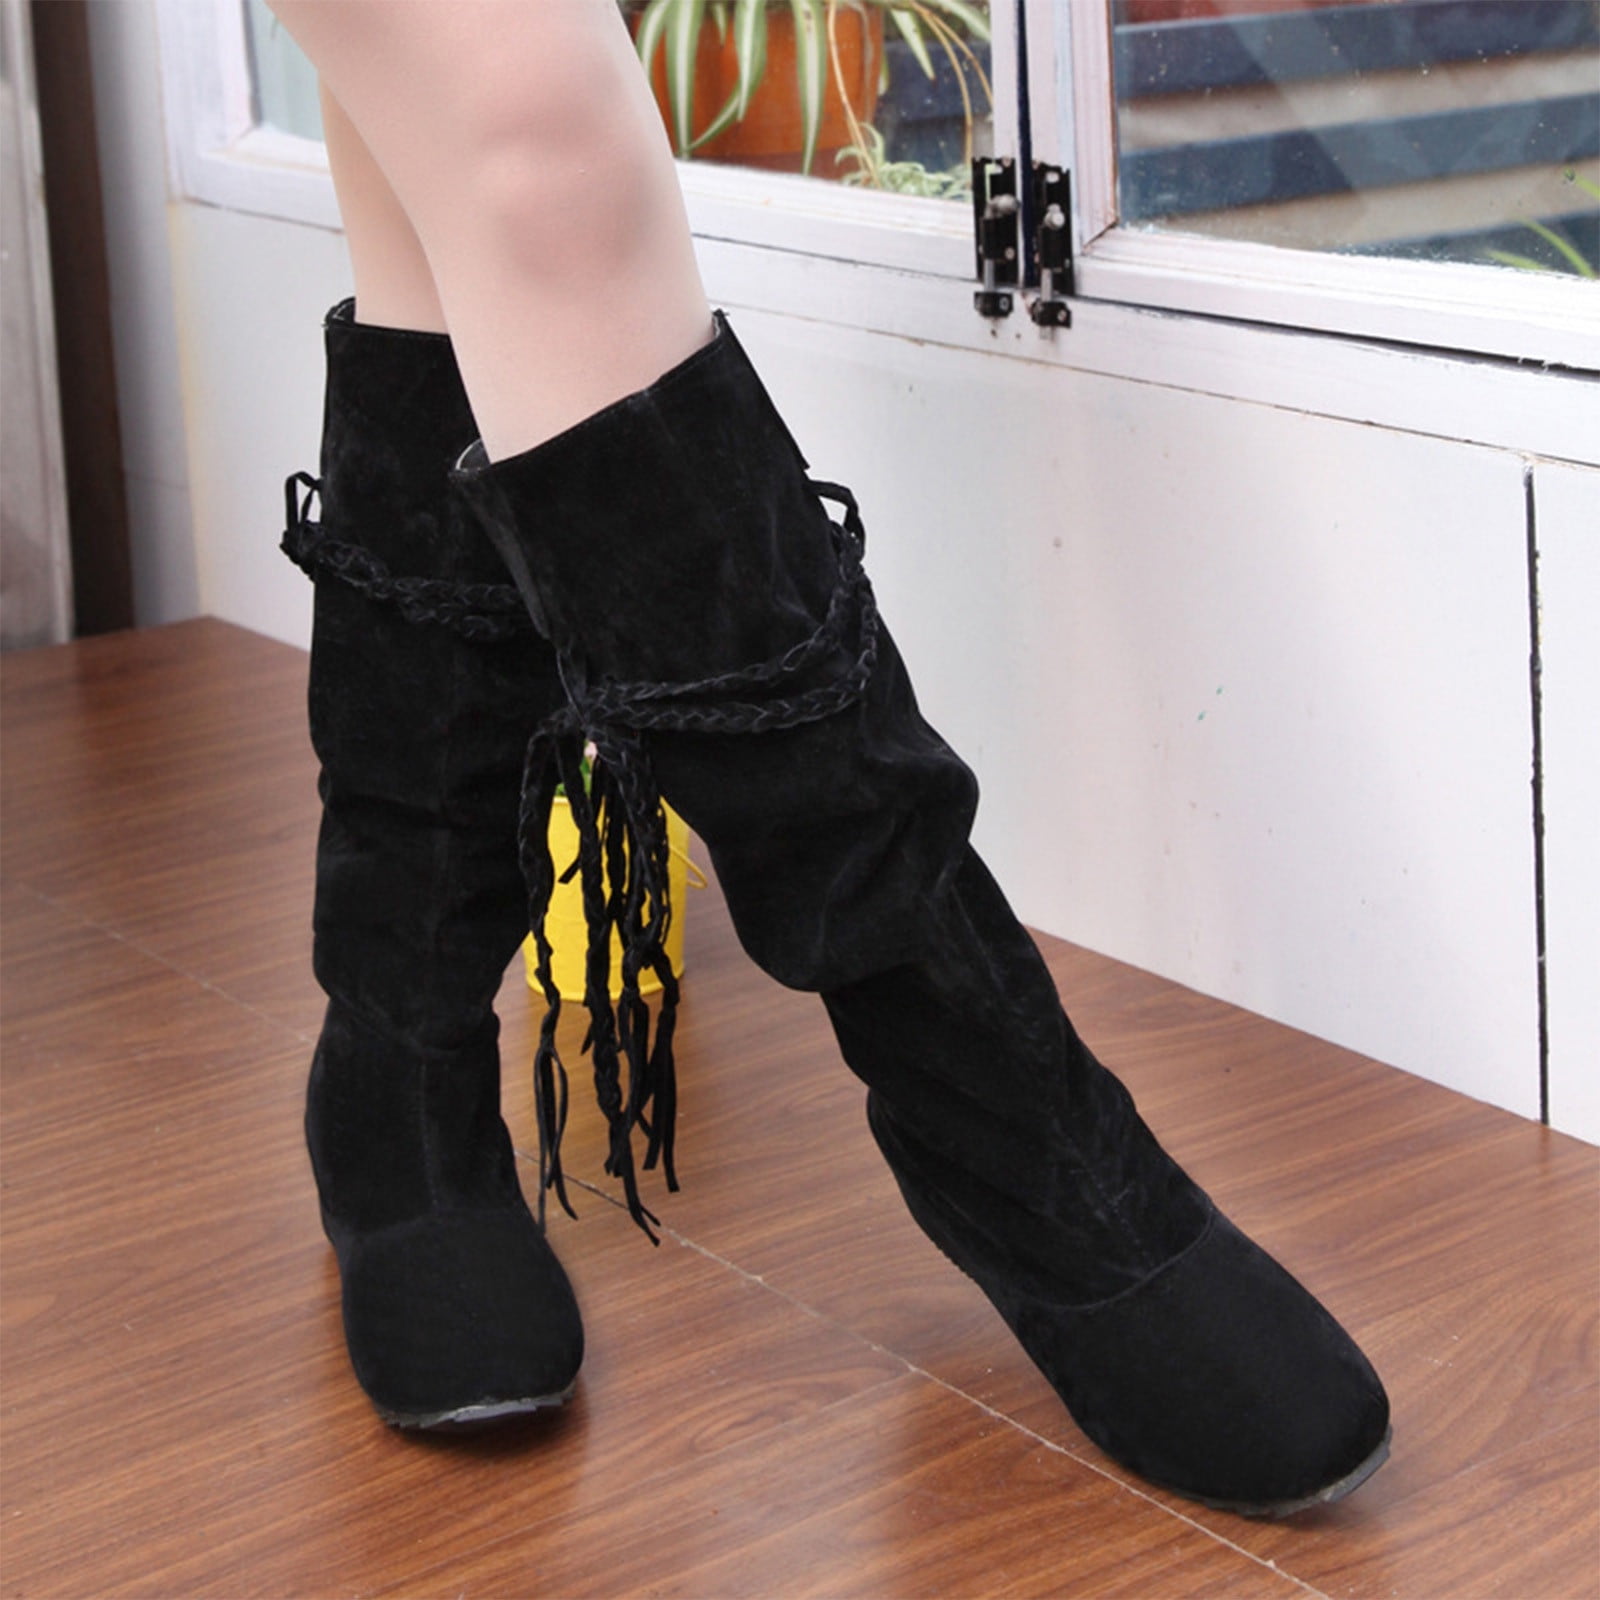 YSL black suede high heeled boots with string tassels EU 39 Shoes Womens Shoes Boots Slouch Boots 